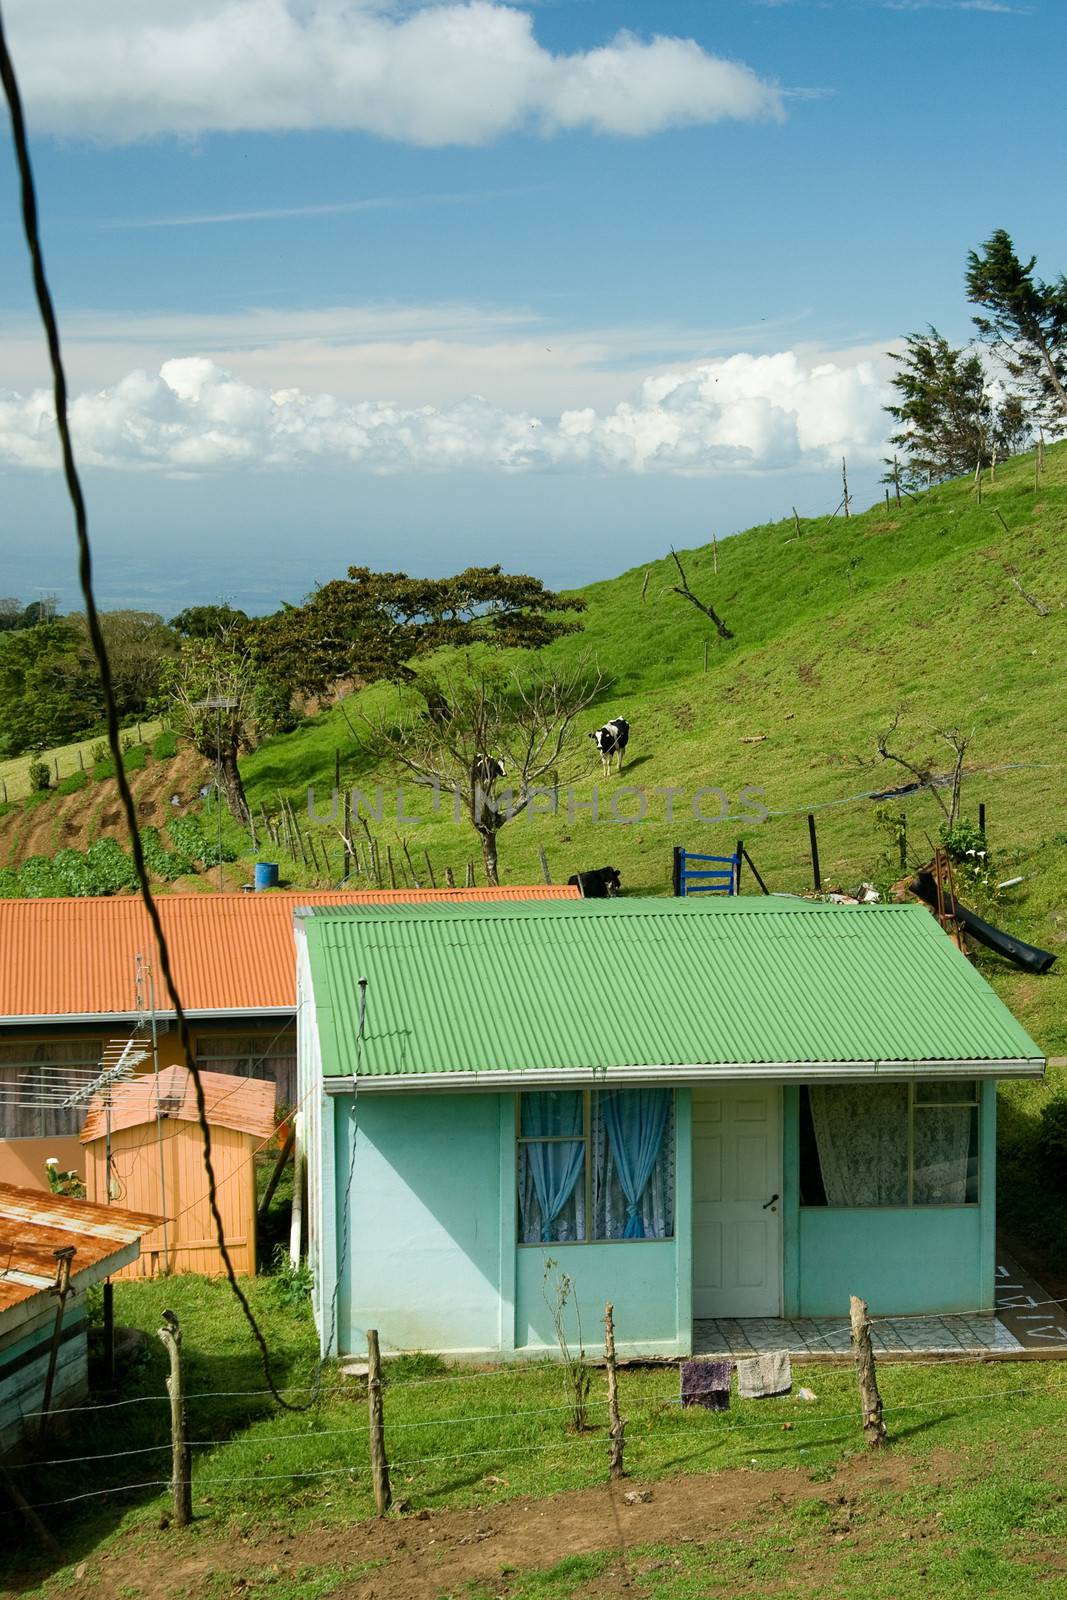 A small house on the hill in the countryside of Costa Rica.